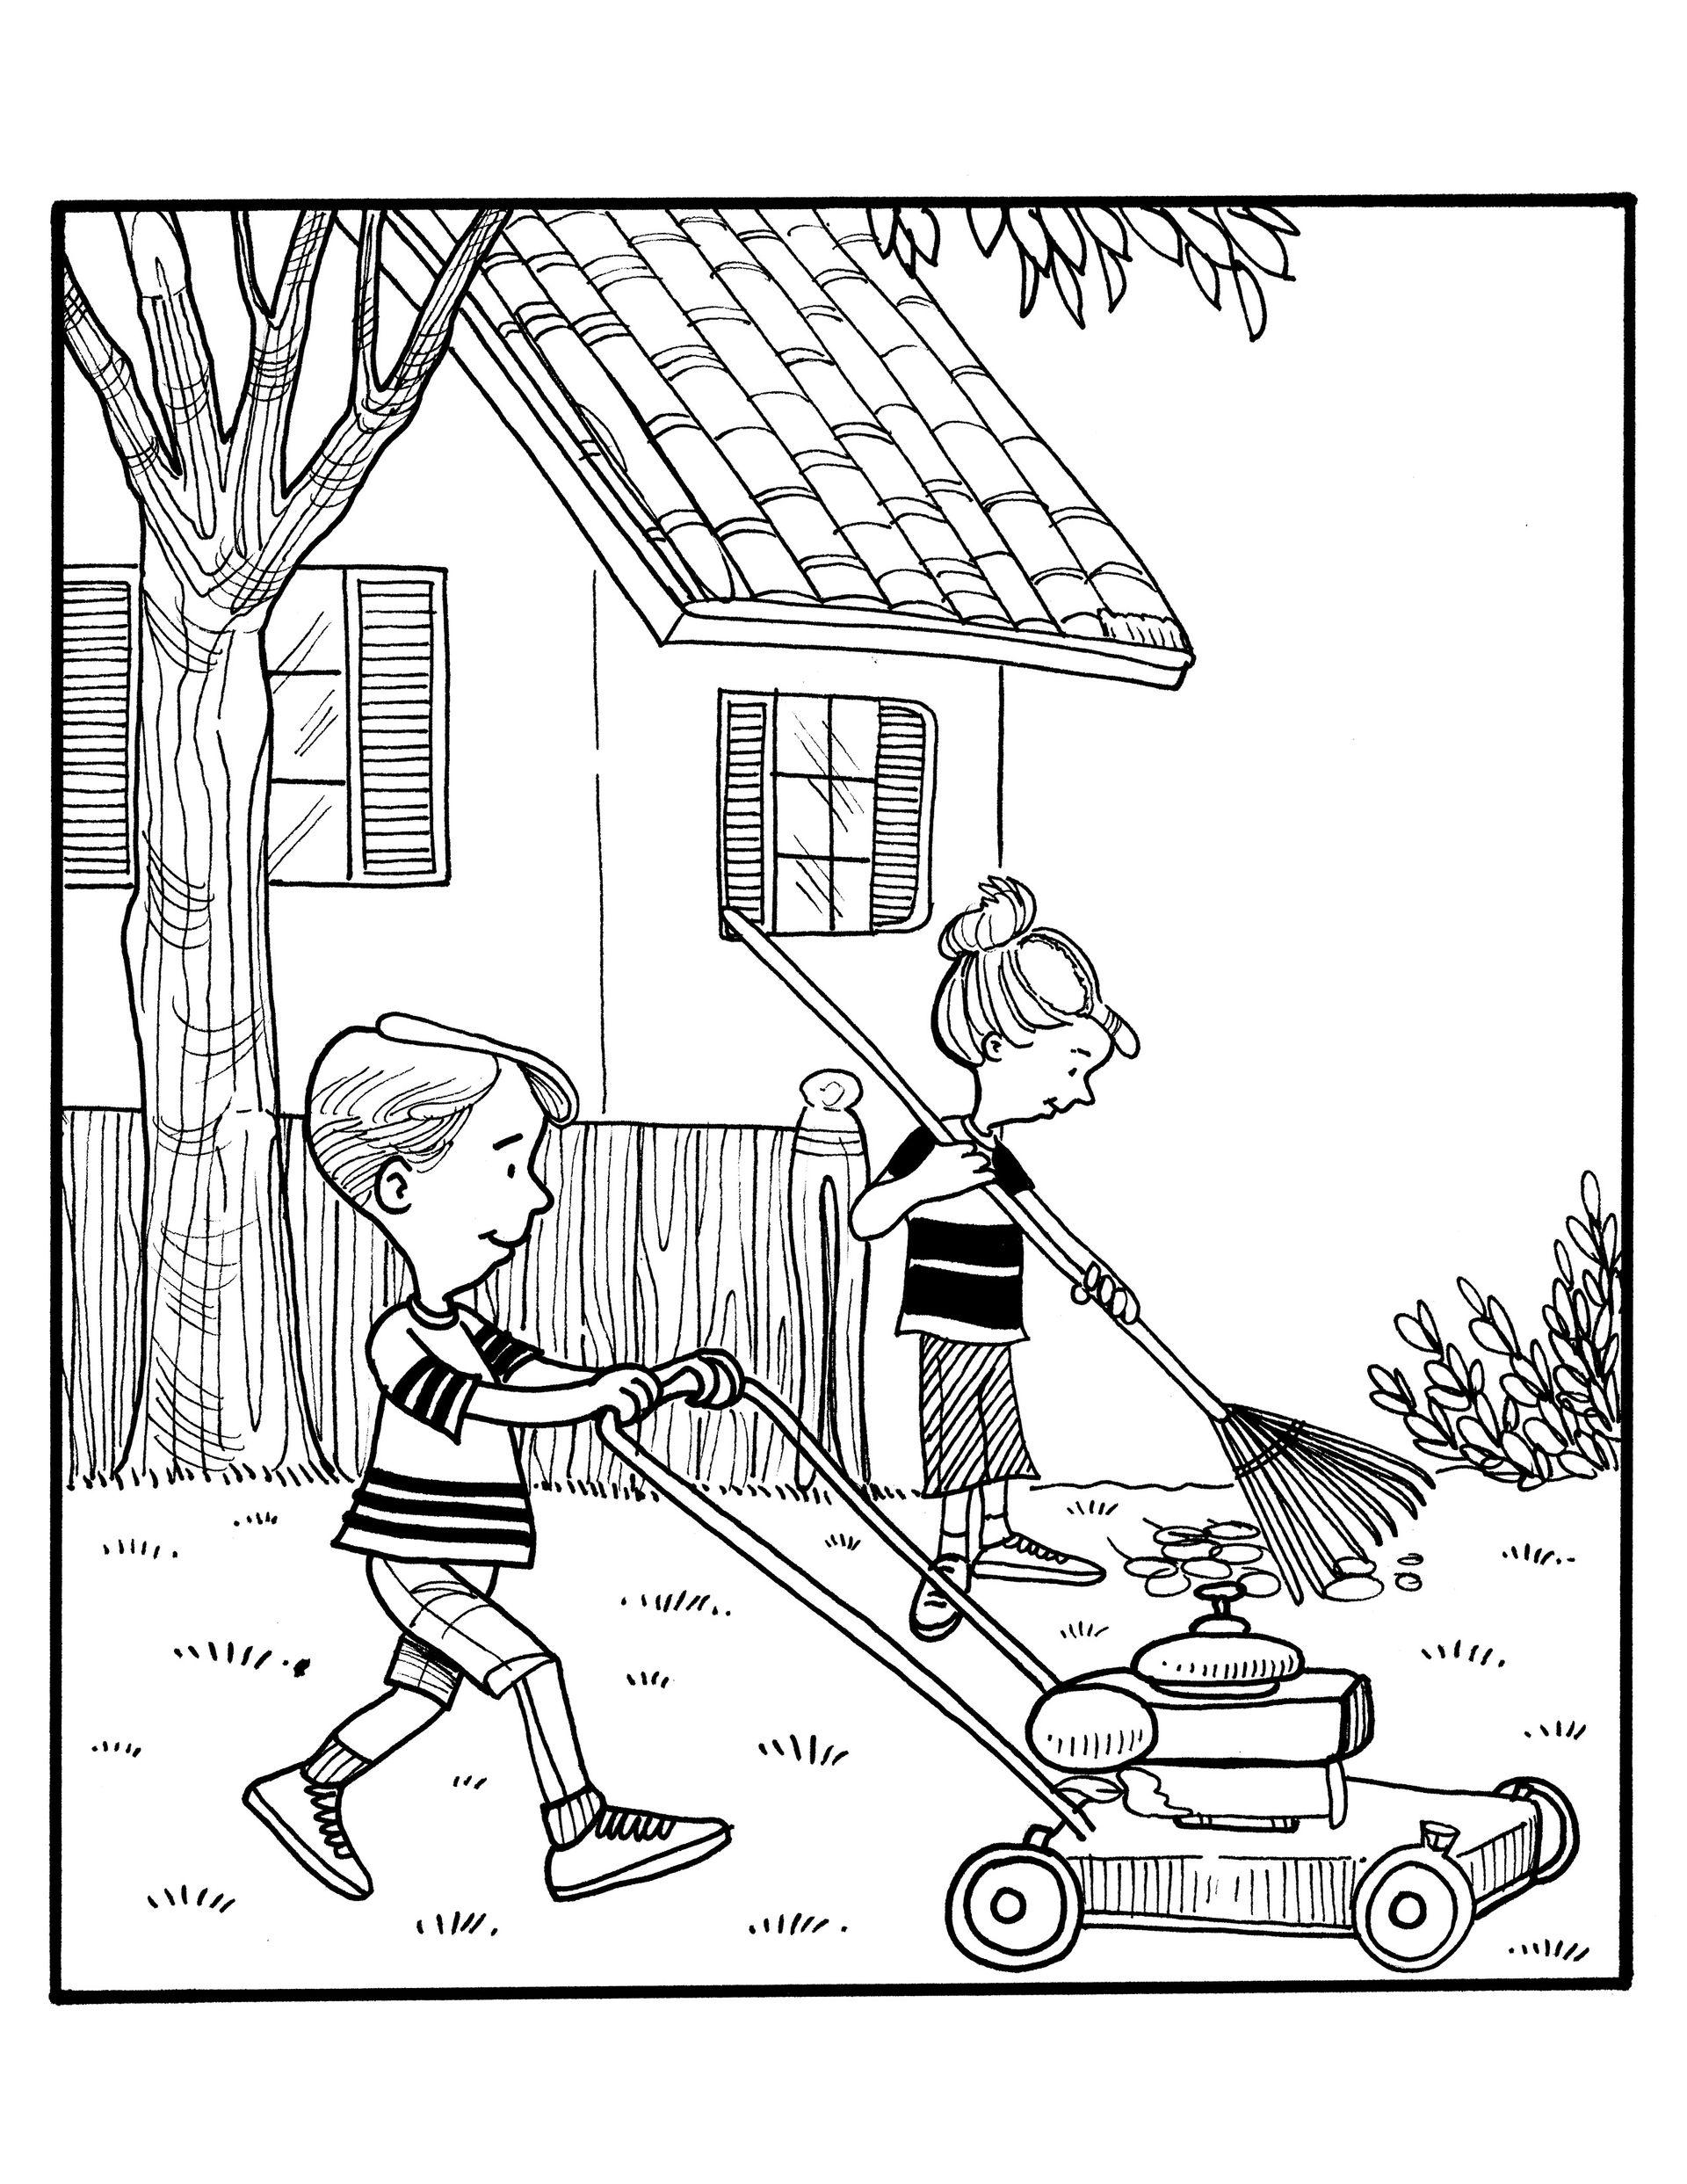 A boy and a girl clean up a yard together.